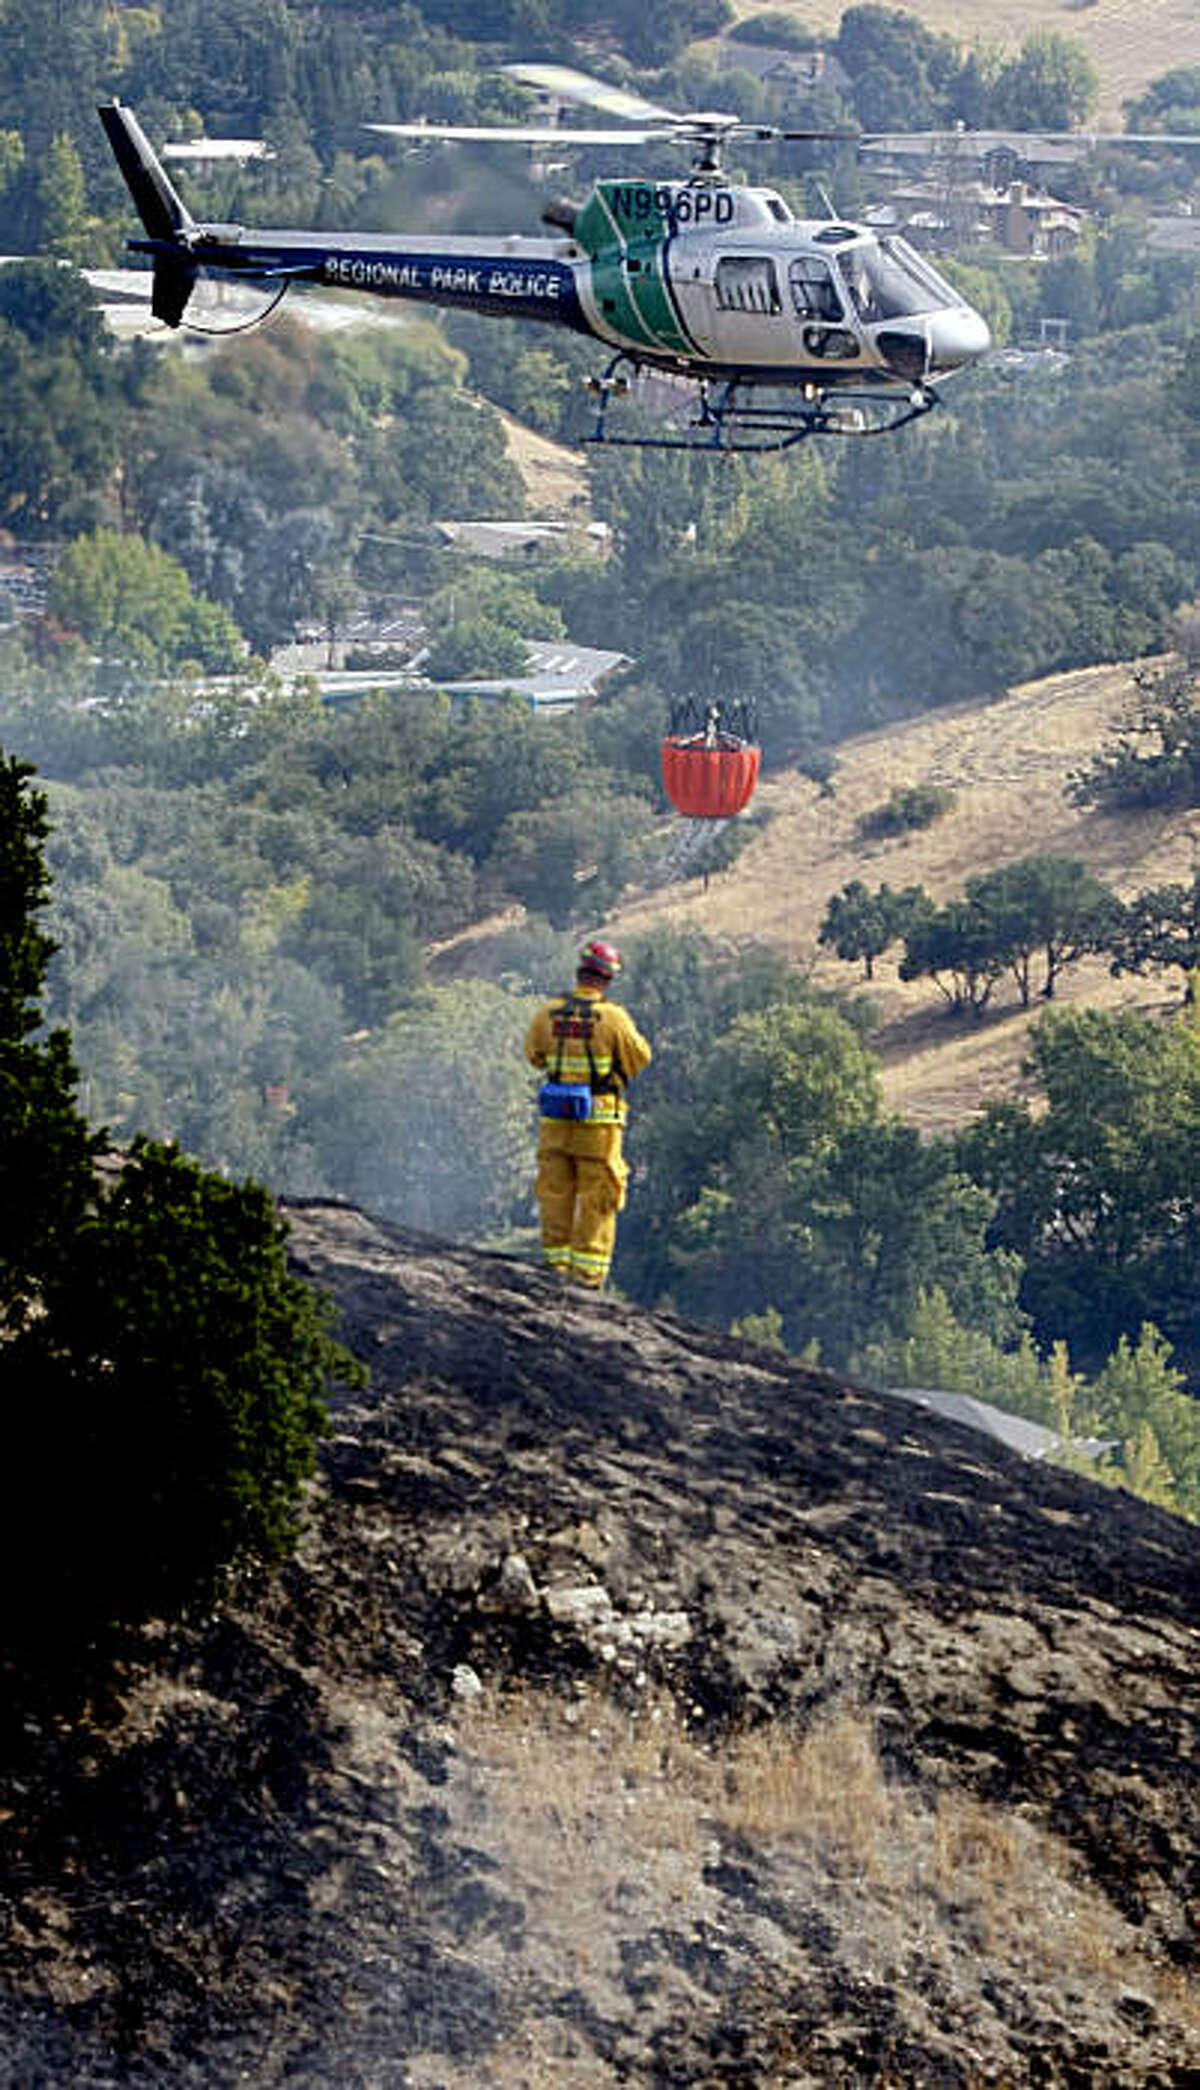 Smoke covers most of the Valley south of Walnut Creek as Capt. Chris Gonsalves from Contra Costa Fire directs a Cal-Fire helicopter to his target zone on a fast moving brush fire above Ross in Walnut Creek Wednesday Sept 2, 2009.